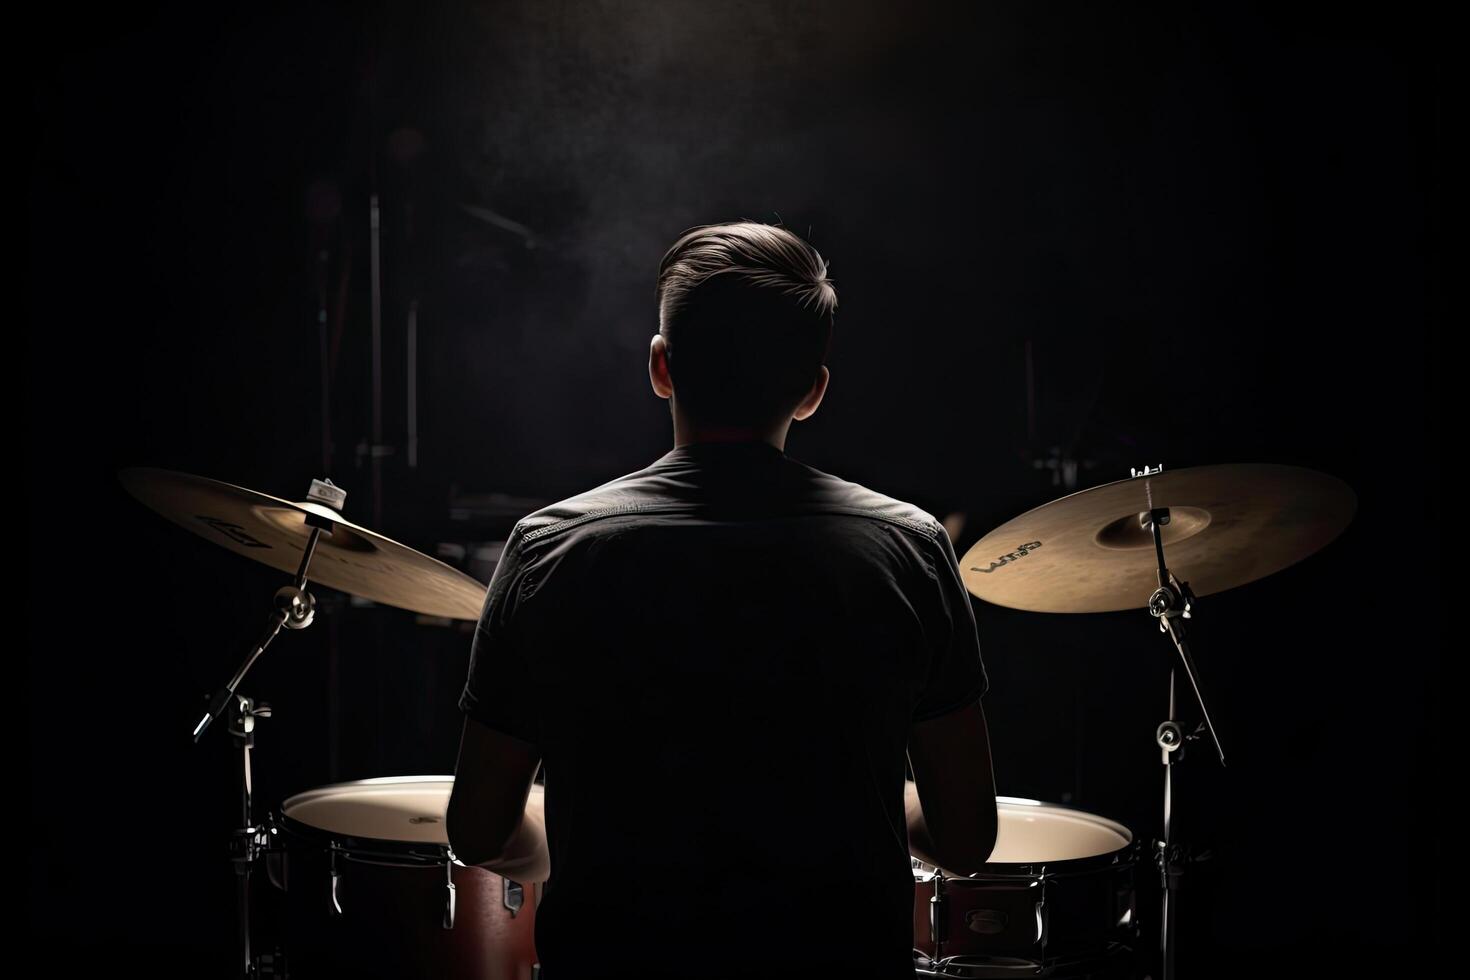 Young man playing drums on a dark background, back view. Music concept, A drummer full rear view playing drums, photo